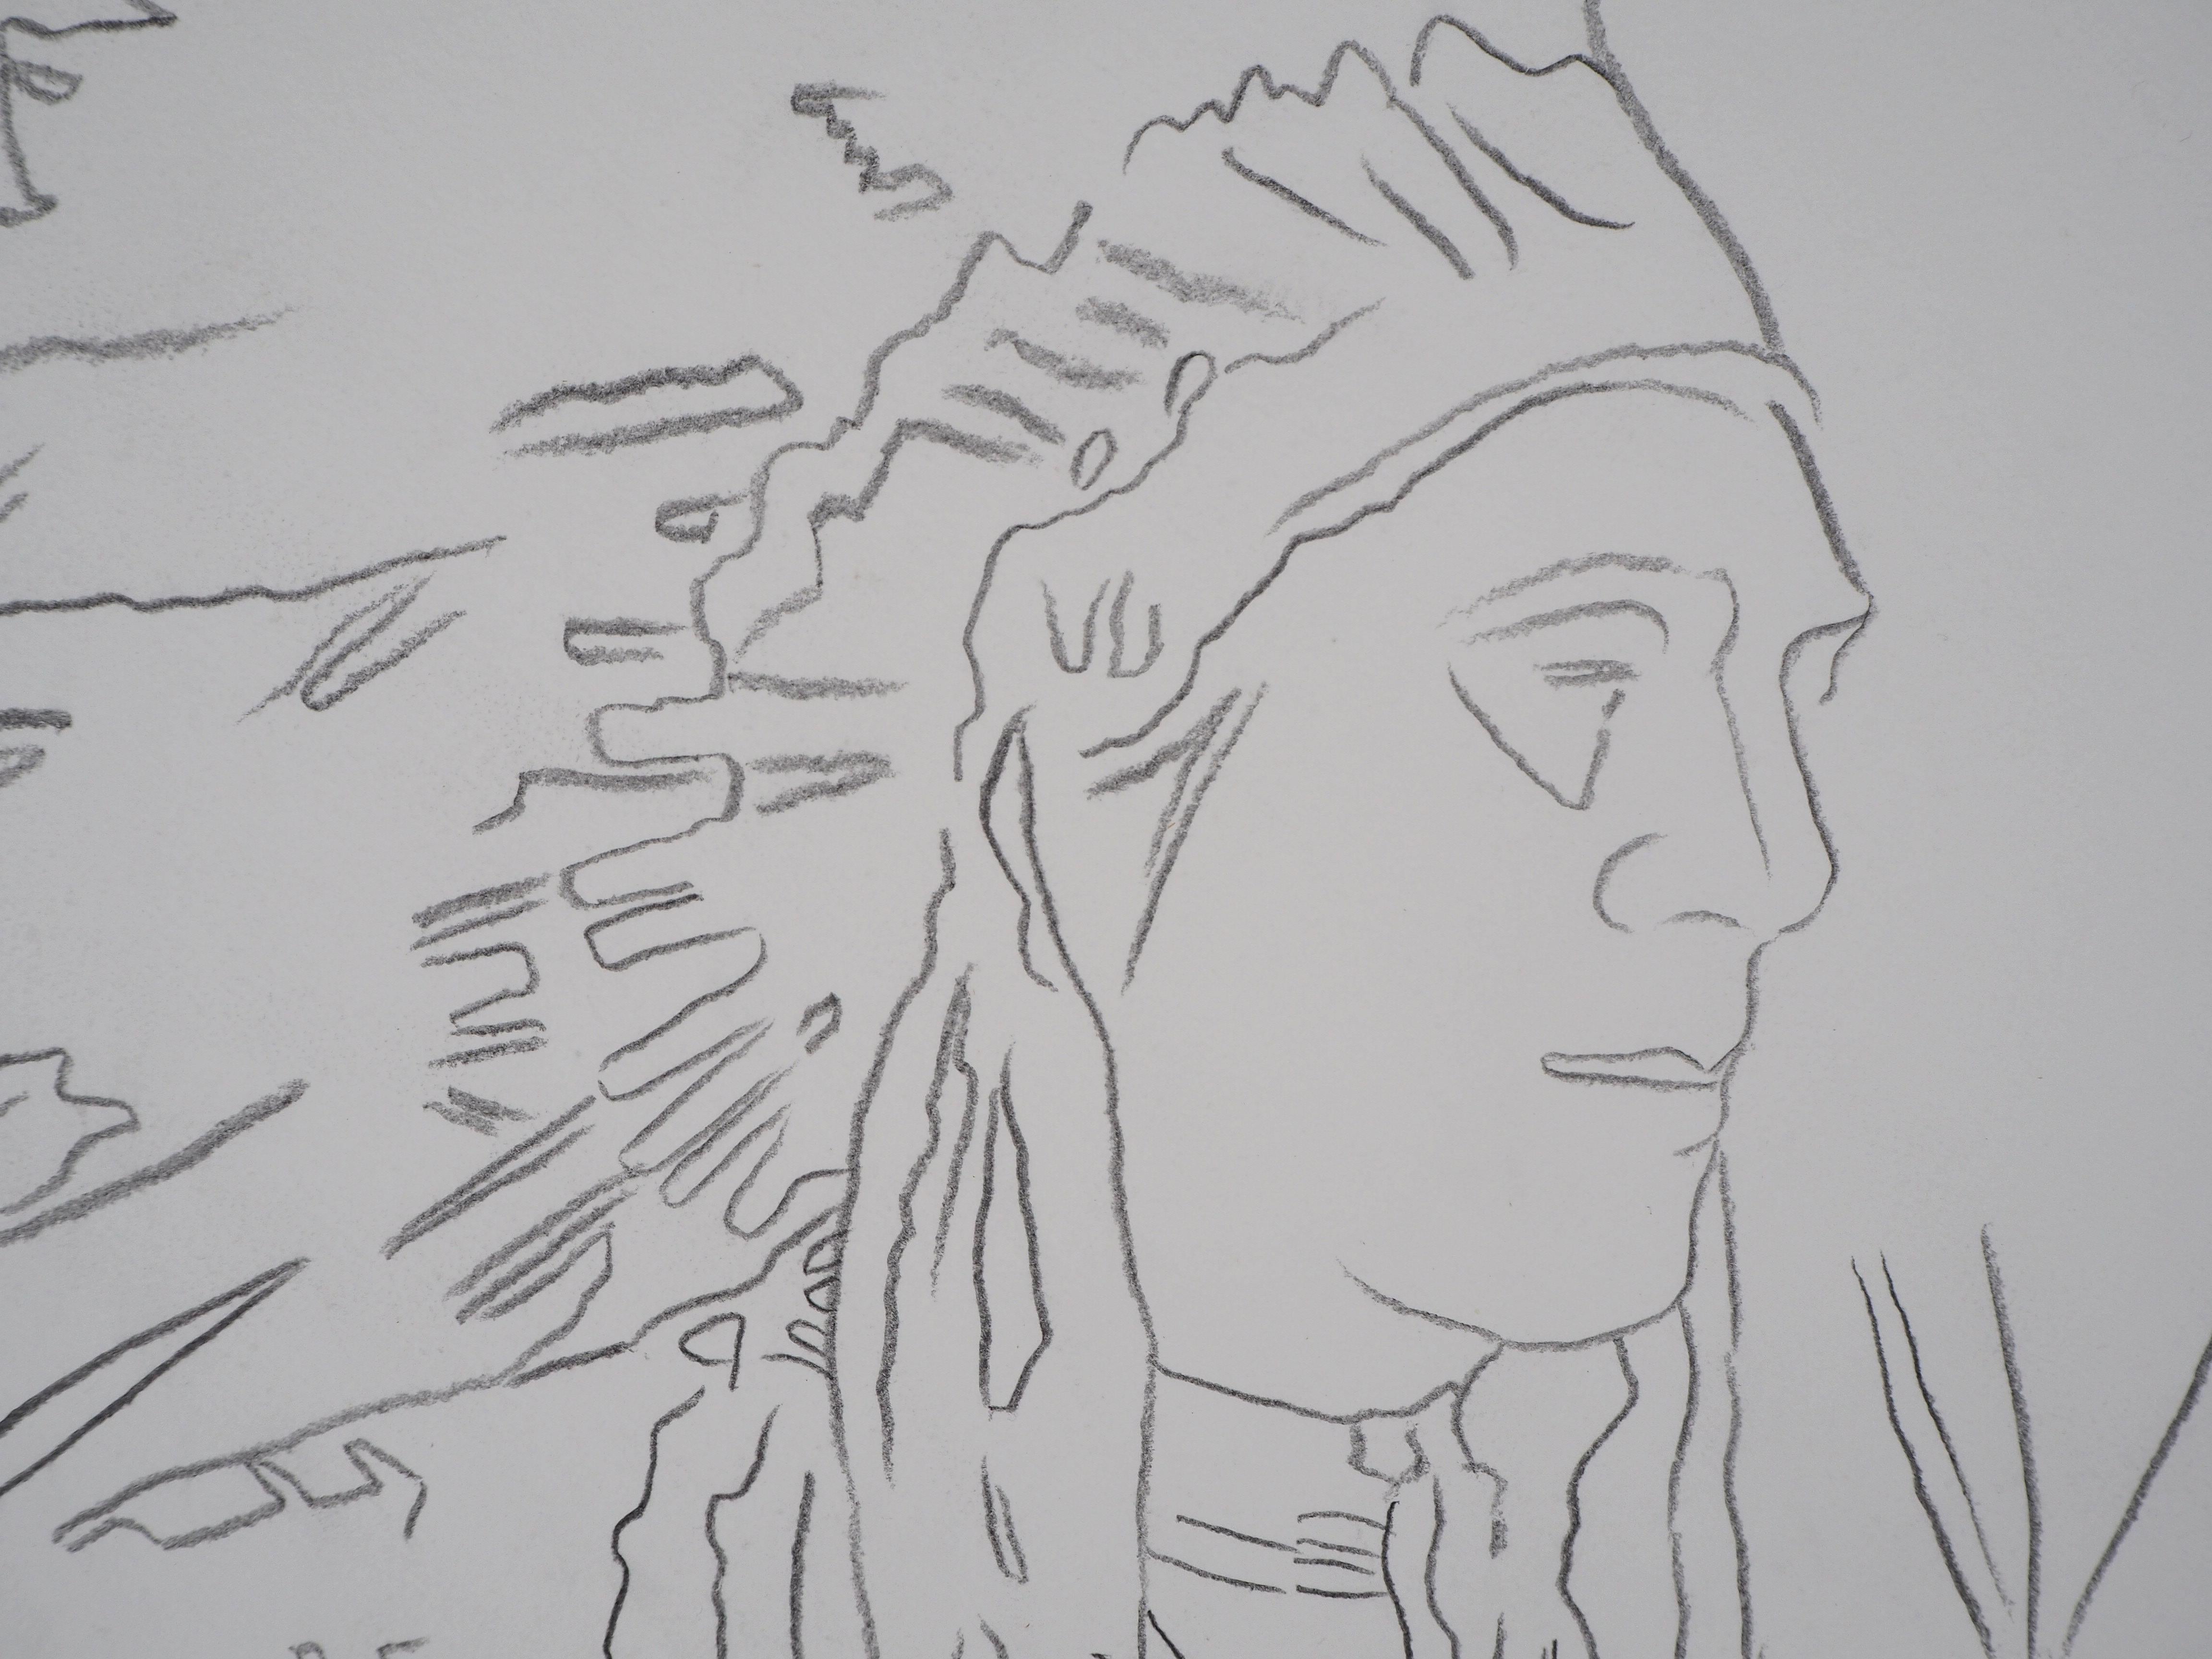 Andy Warhol (1928-1987)
Indian : War Bonnet, c. 1986

Original pencil drawing
On vellum 101.5 x 77.5 cm (c. 39.9 x 30.3 in)
On the back of the drawing figures the stamp of the WARHOL FOUNDATION FOR THE VISUAL ARTS with the number of the inventory